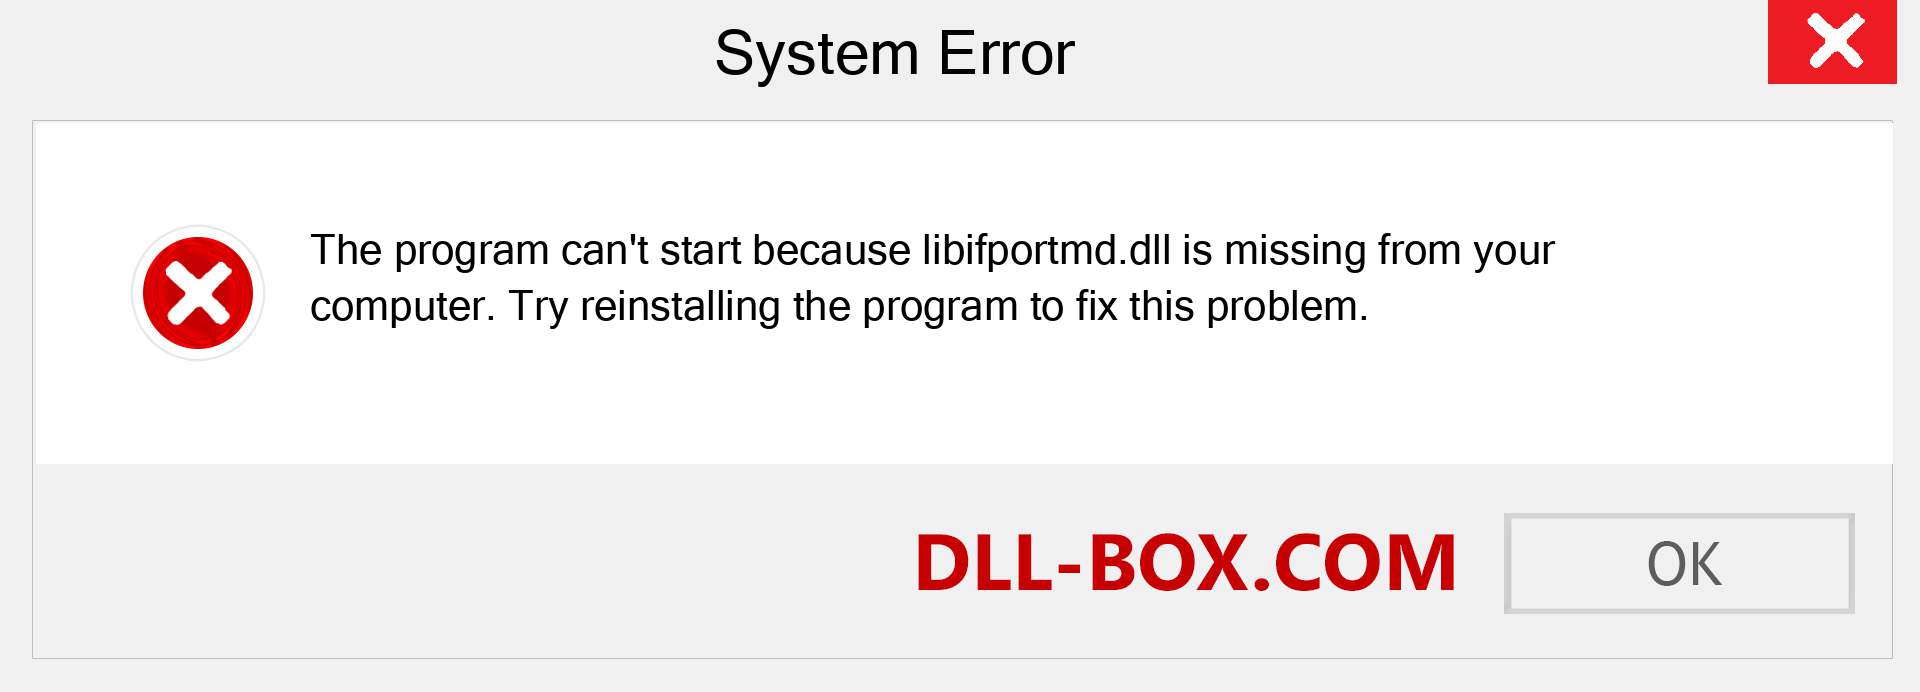  libifportmd.dll file is missing?. Download for Windows 7, 8, 10 - Fix  libifportmd dll Missing Error on Windows, photos, images